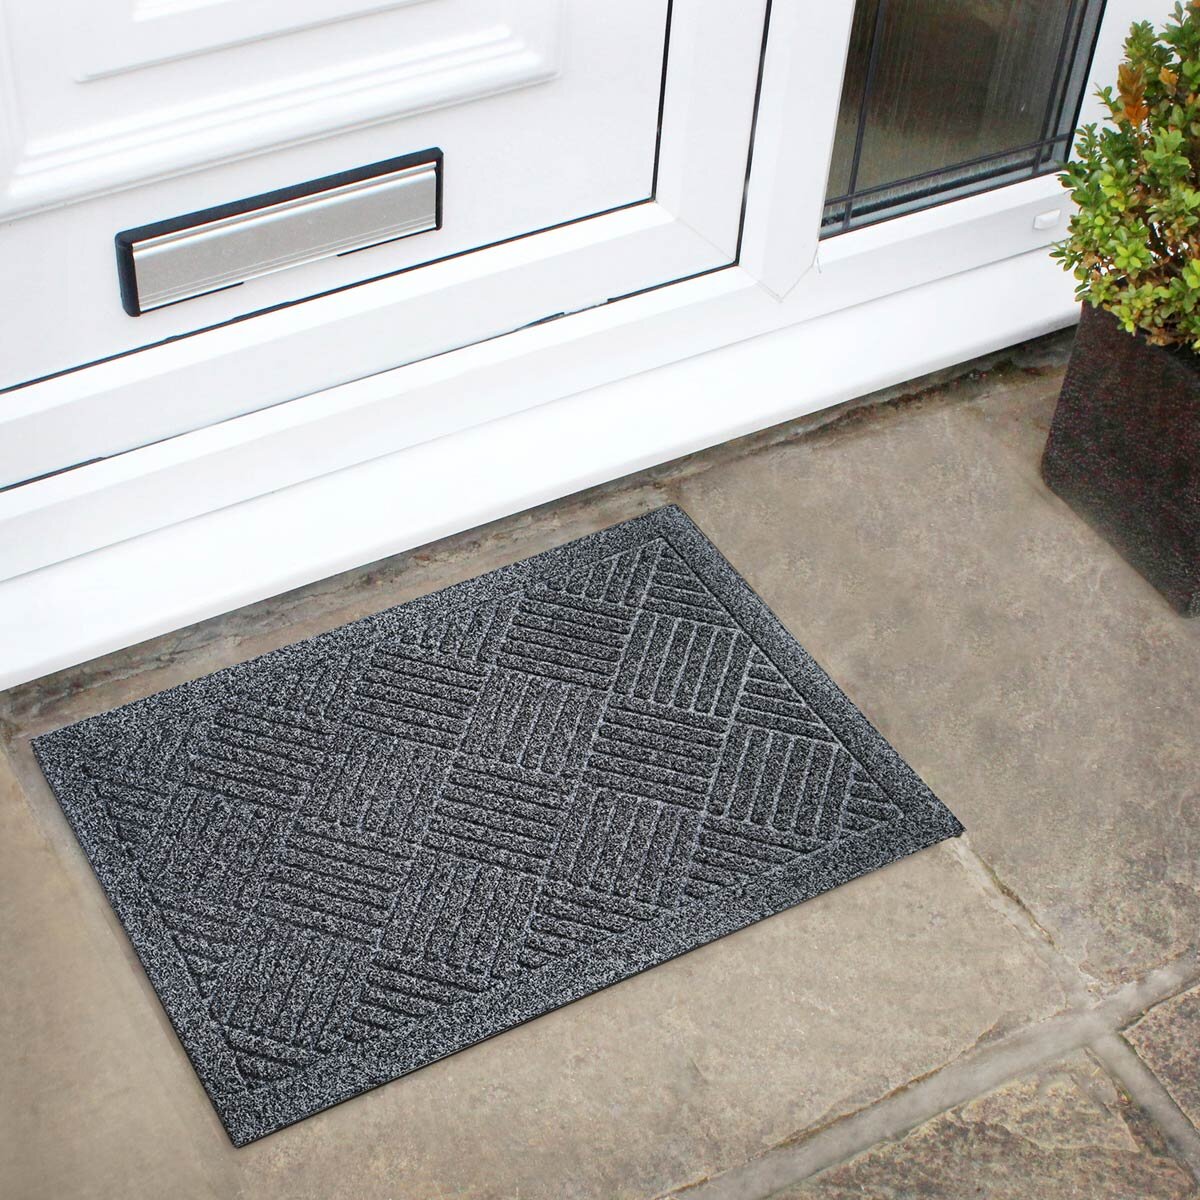 Lifestyle image of mat outside front door